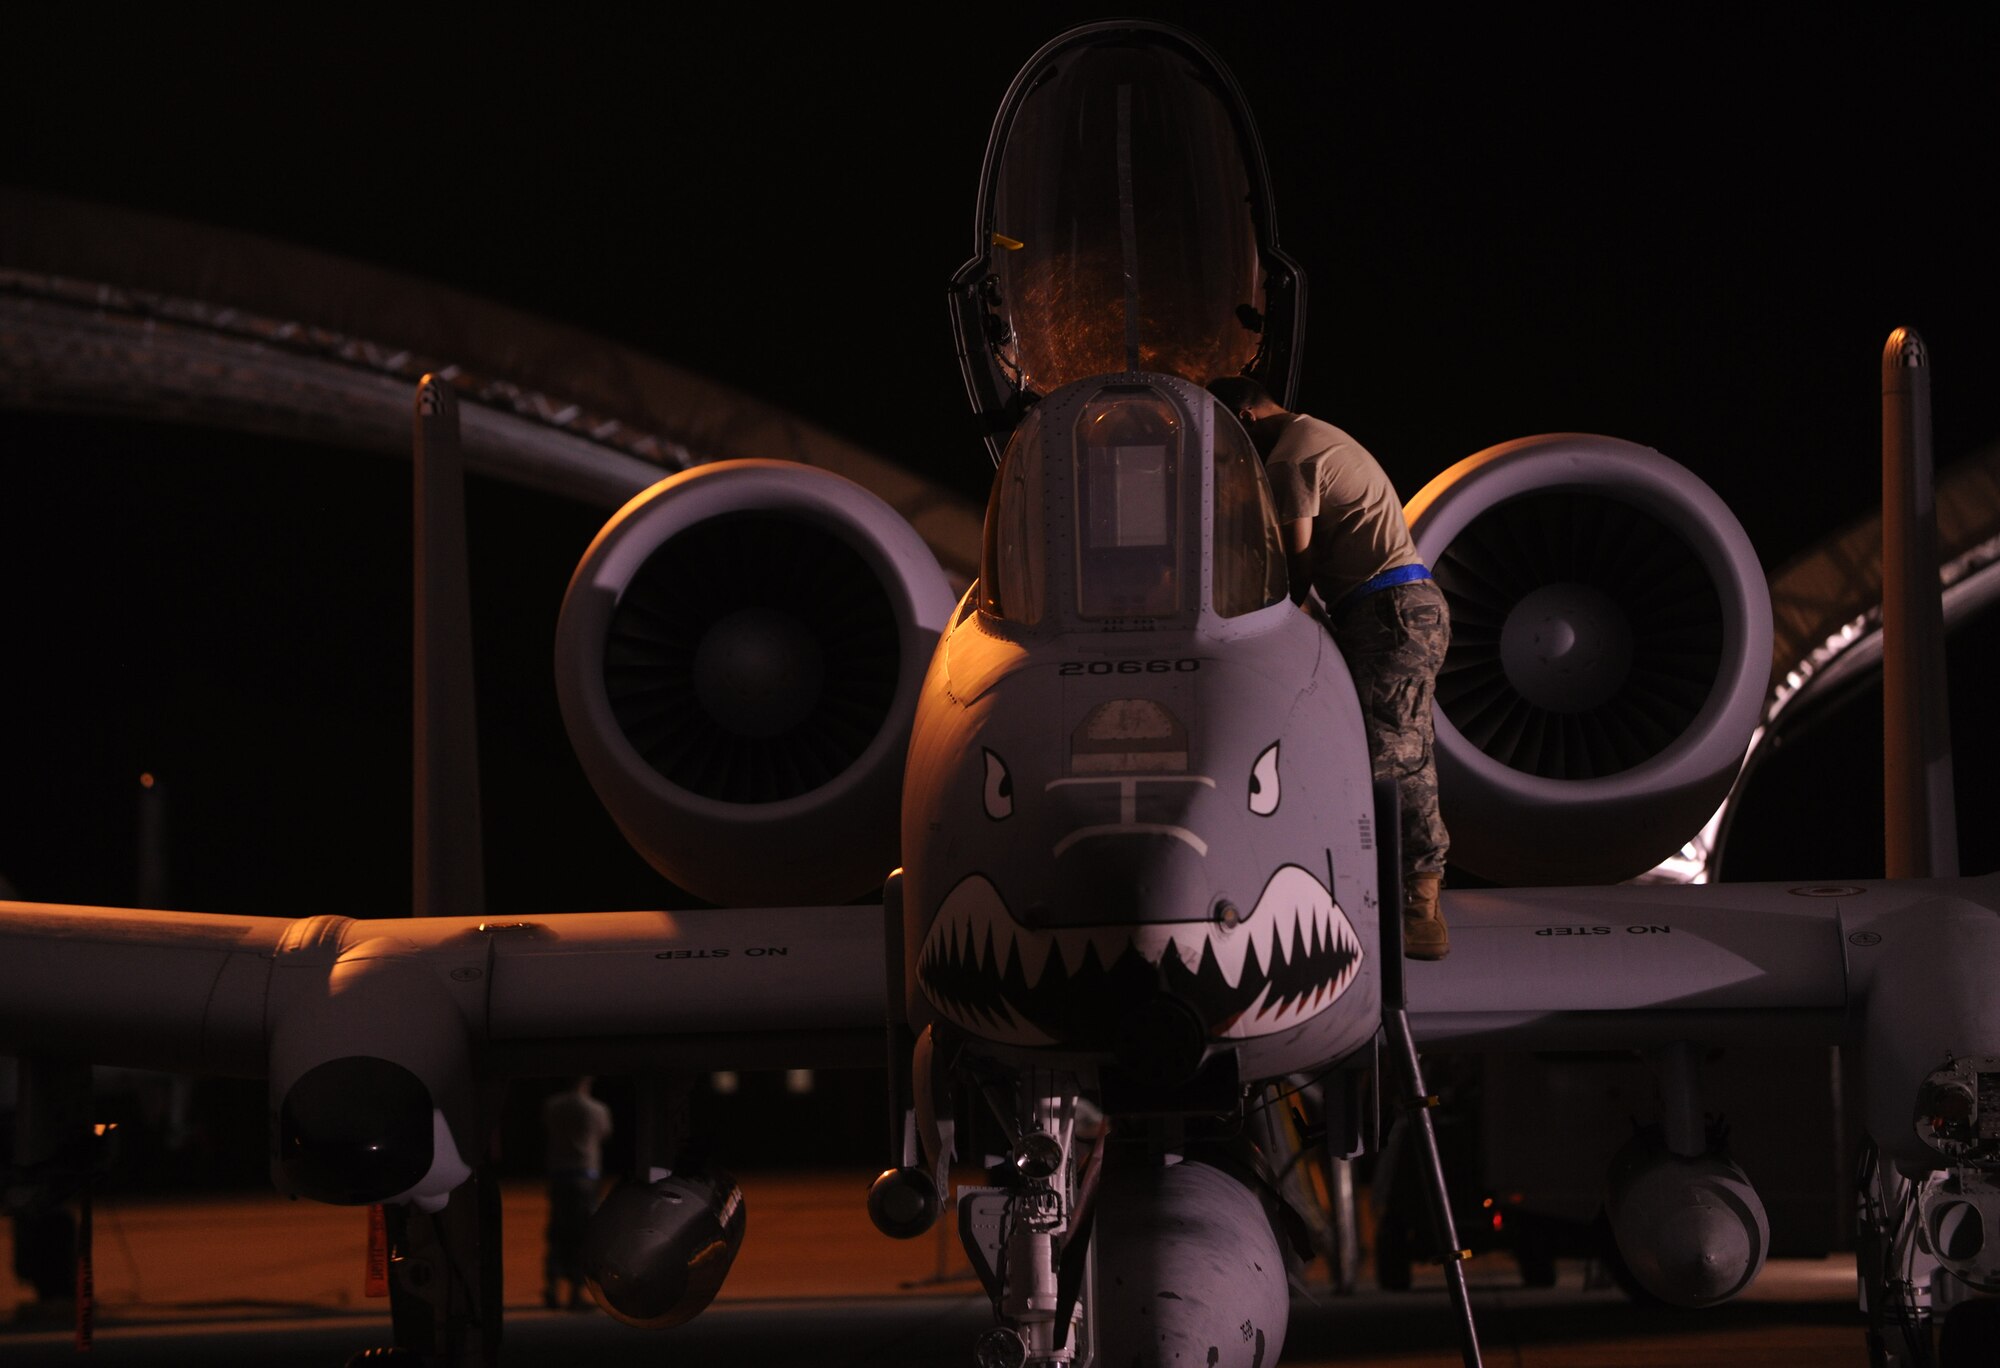 MOODY AIR FORCE BASE, Ga. -- Staff Sgt. Mathew Houston, 74th Aircraft Maintenance Unit dedicated crew chief, checks with the pilot of an A-10C Thunderbolt II aircraft before take-off here. Members from the 75th Fighter Squadron are deployed to Afghanistan. (U.S. Air Force photo/Airman 1st Class Benjamin Wiseman)
